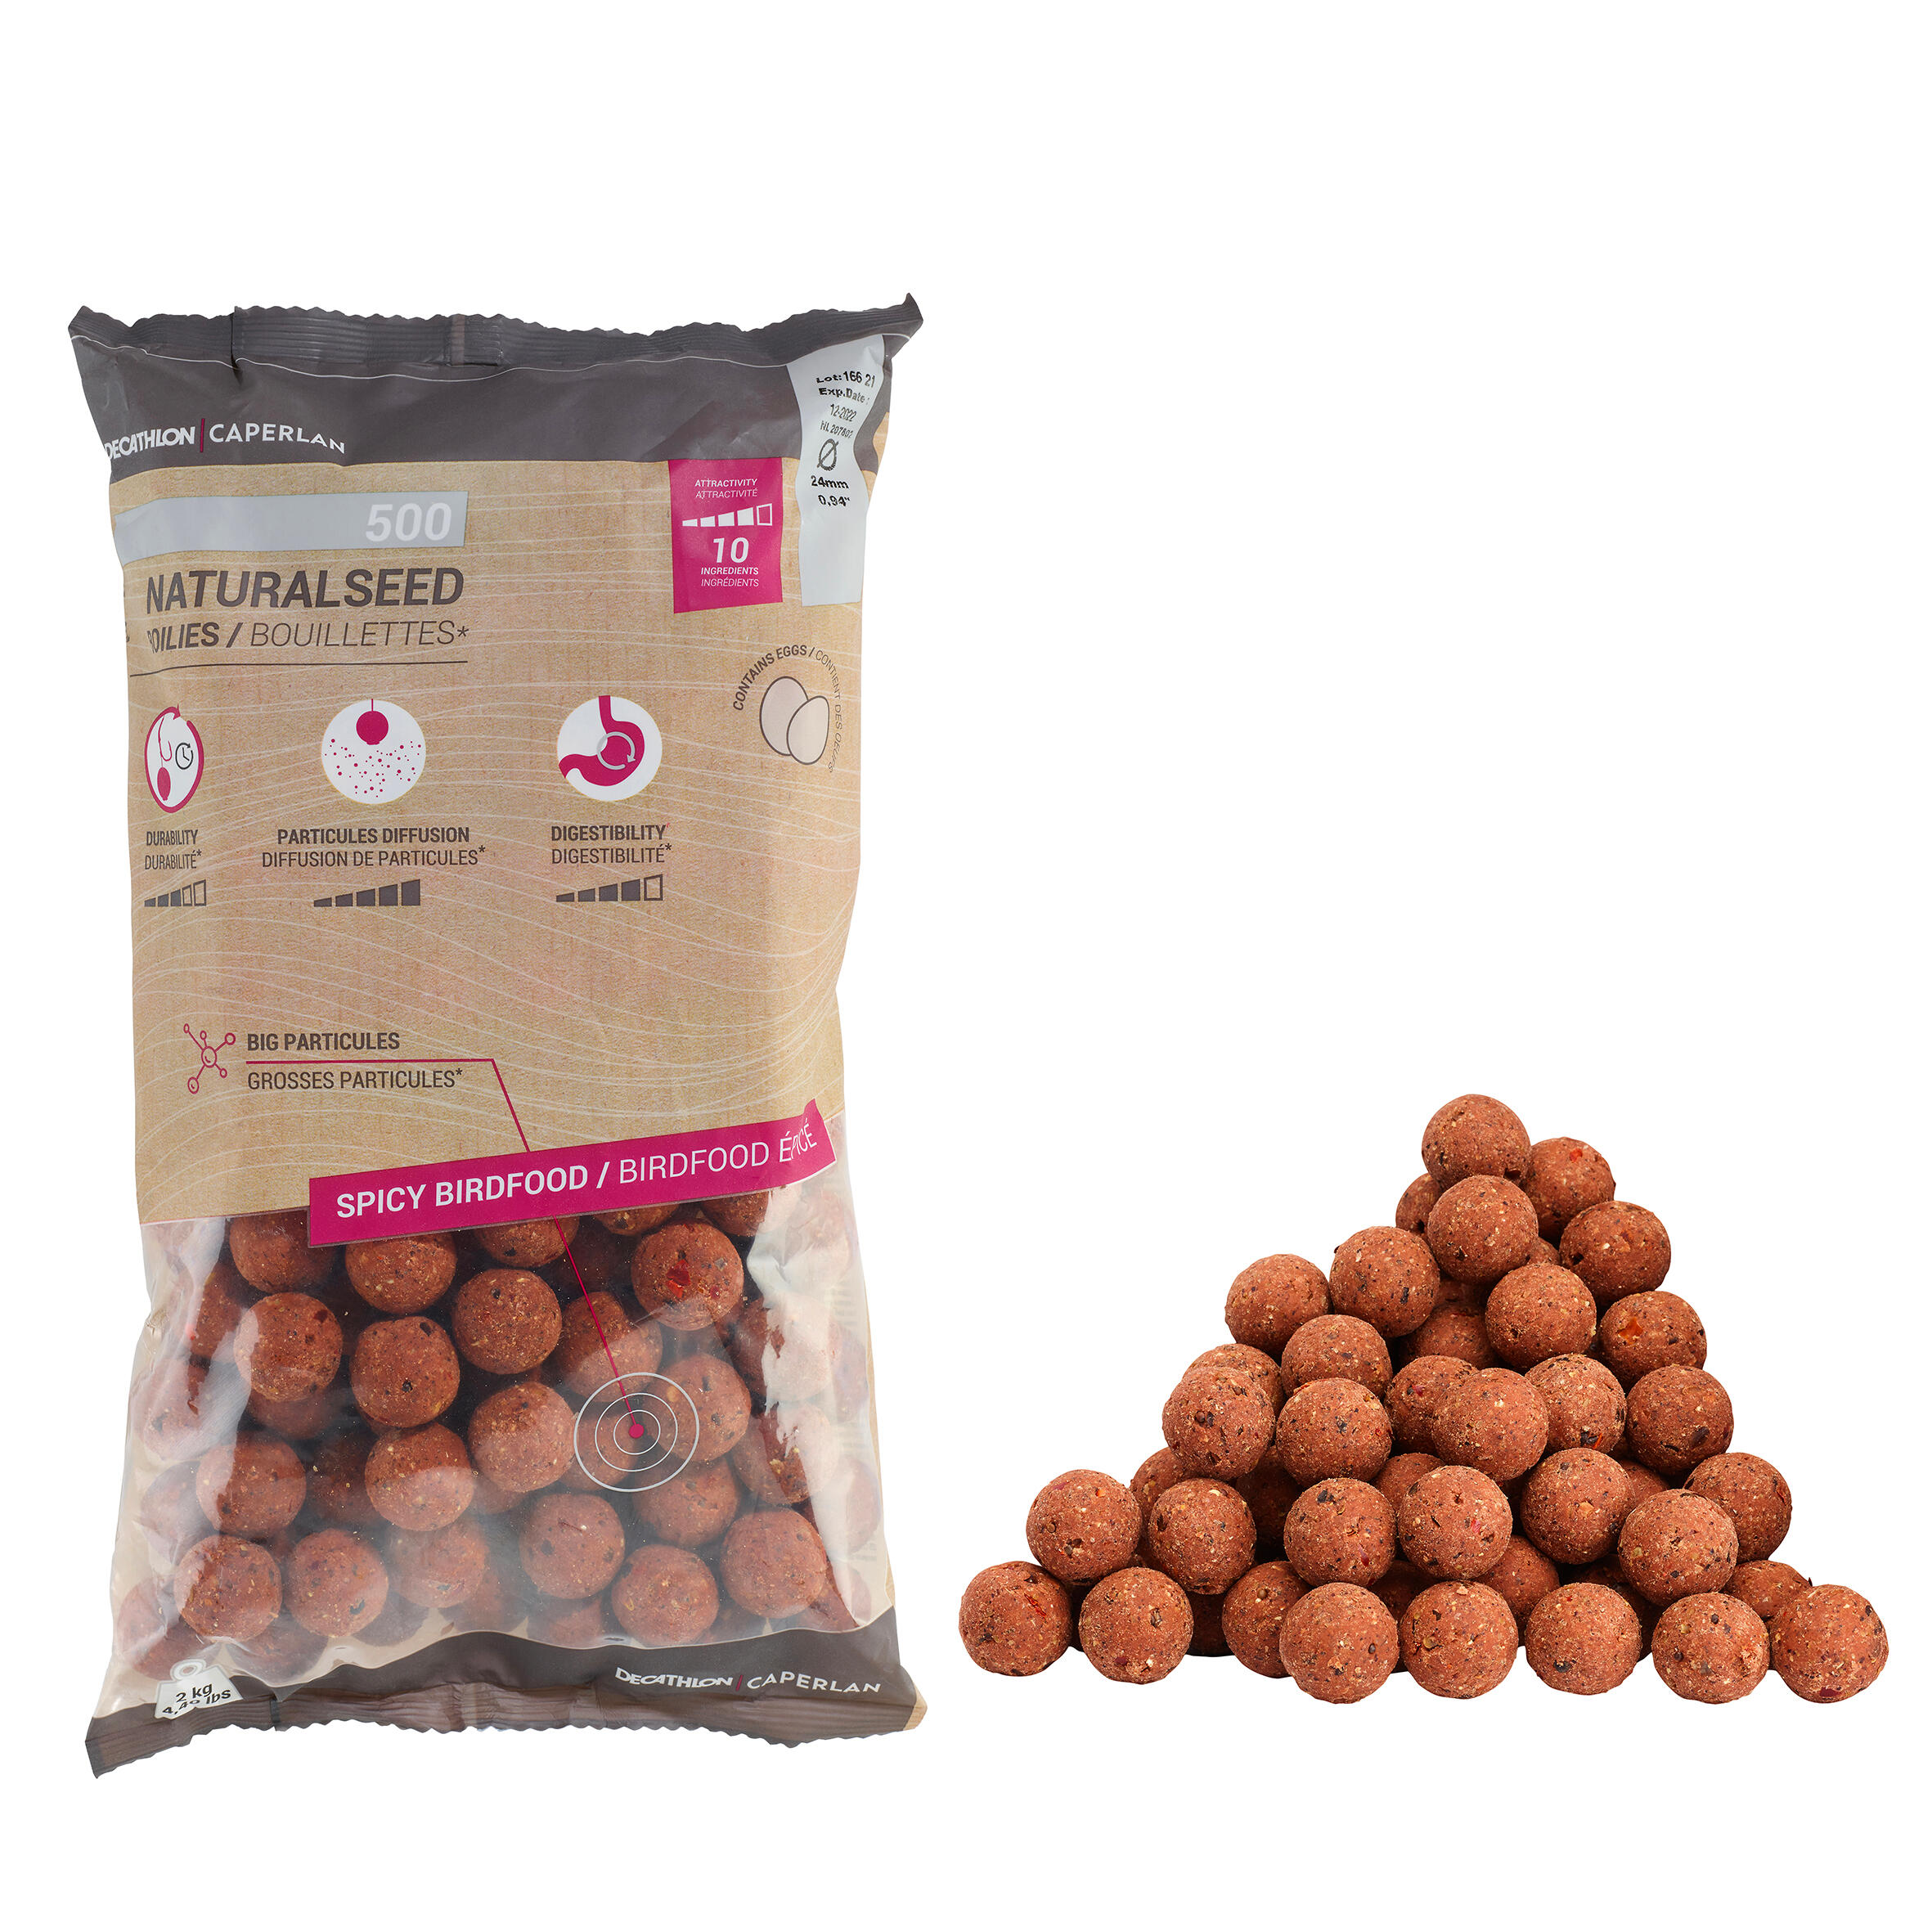 CAPERLAN Carp Fishing Boilies NATURALSEED 24 mm 2 kg - Spicy Birdfood